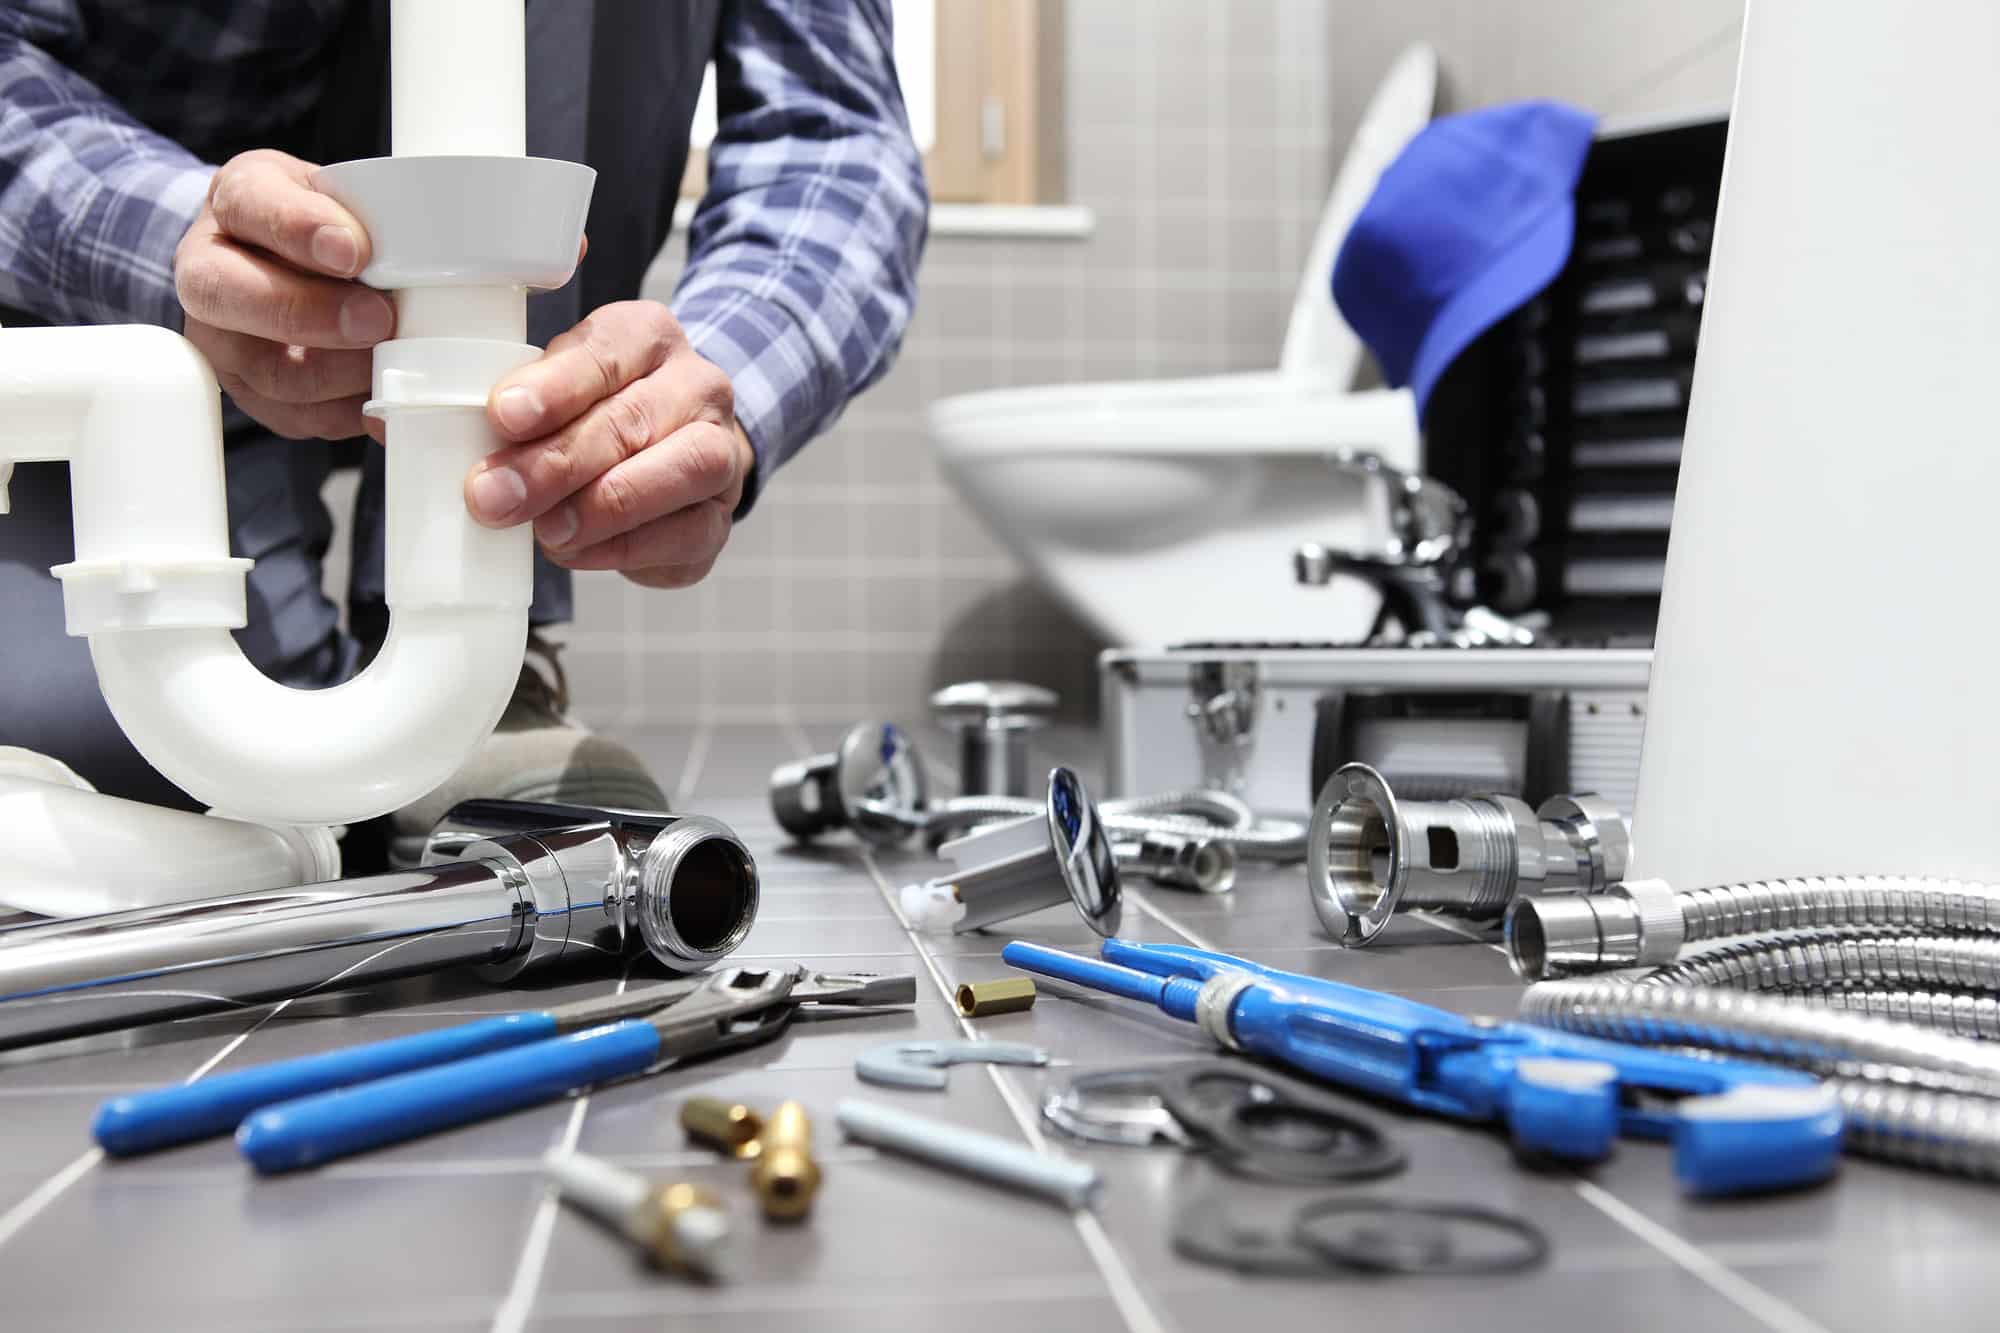 Types of Plumbing Services Every Homeowner Should Know